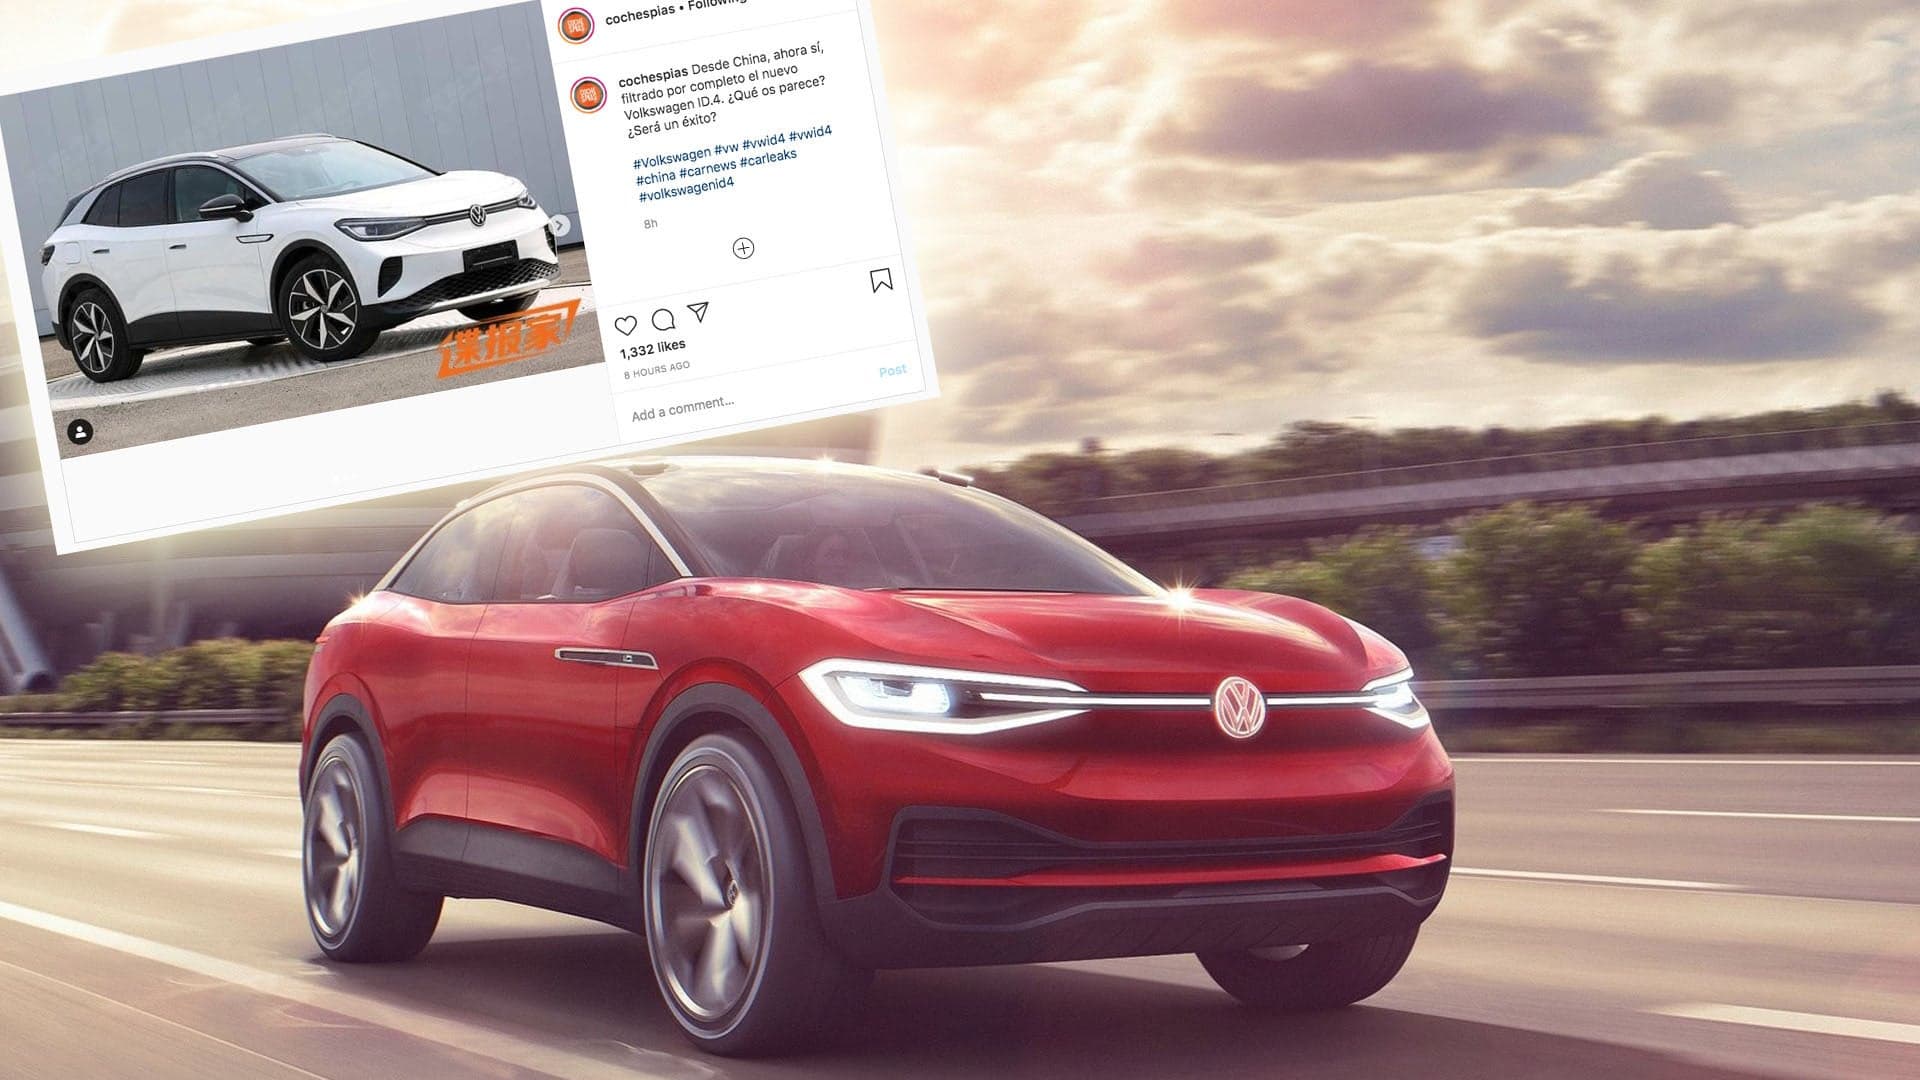 Leak: This Is Probably the All-Electric Volkswagen ID.4 Crossover